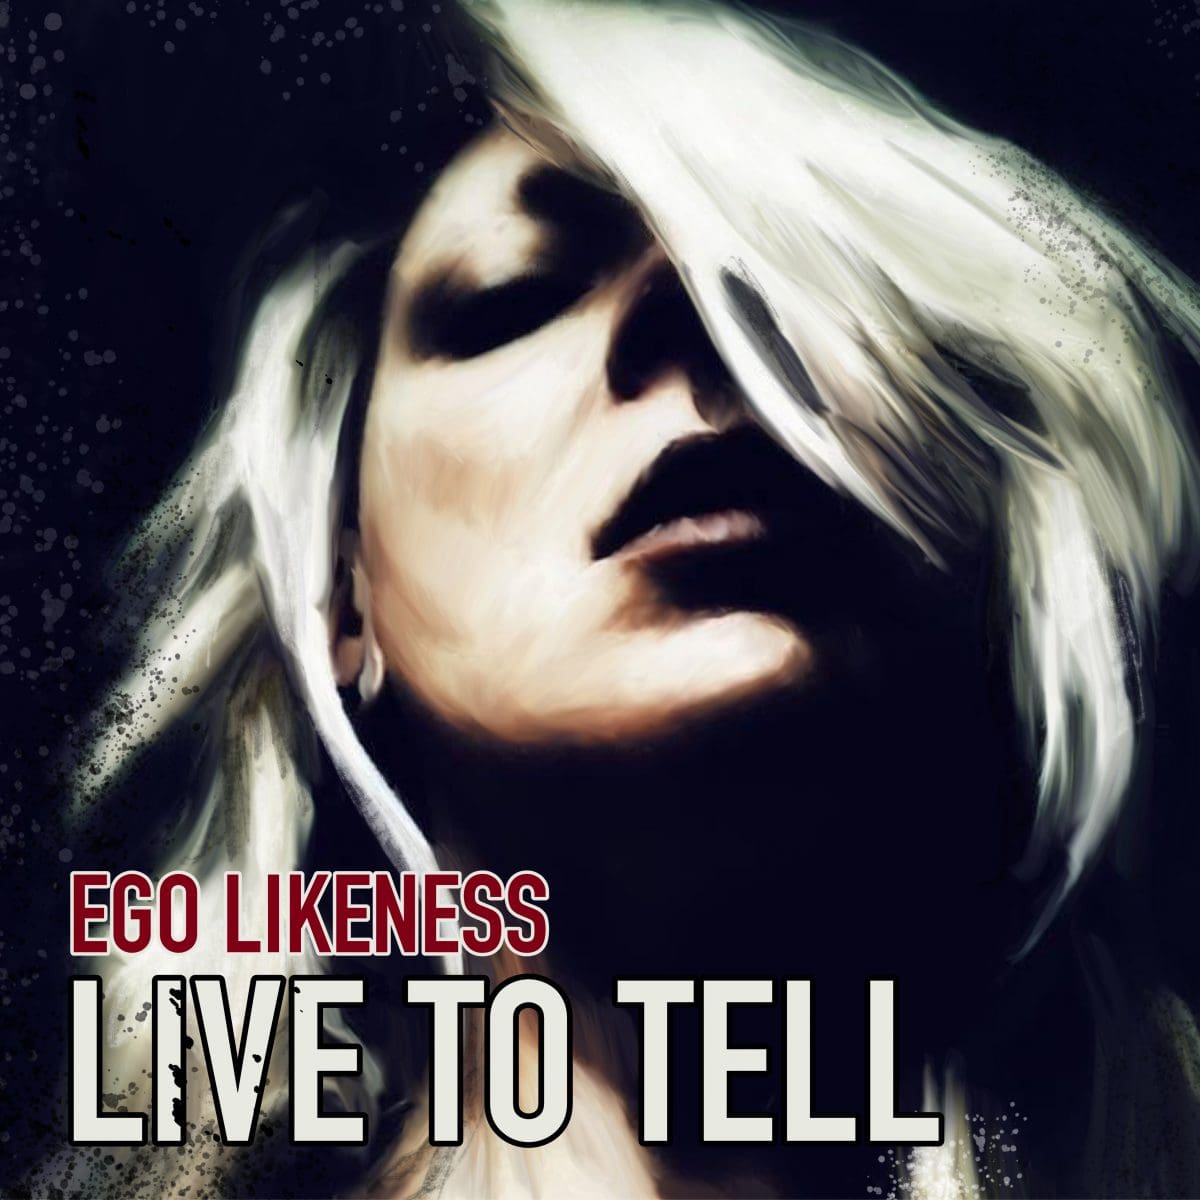 Ego Likeness cover classic Madonna track 'Live to Tell'